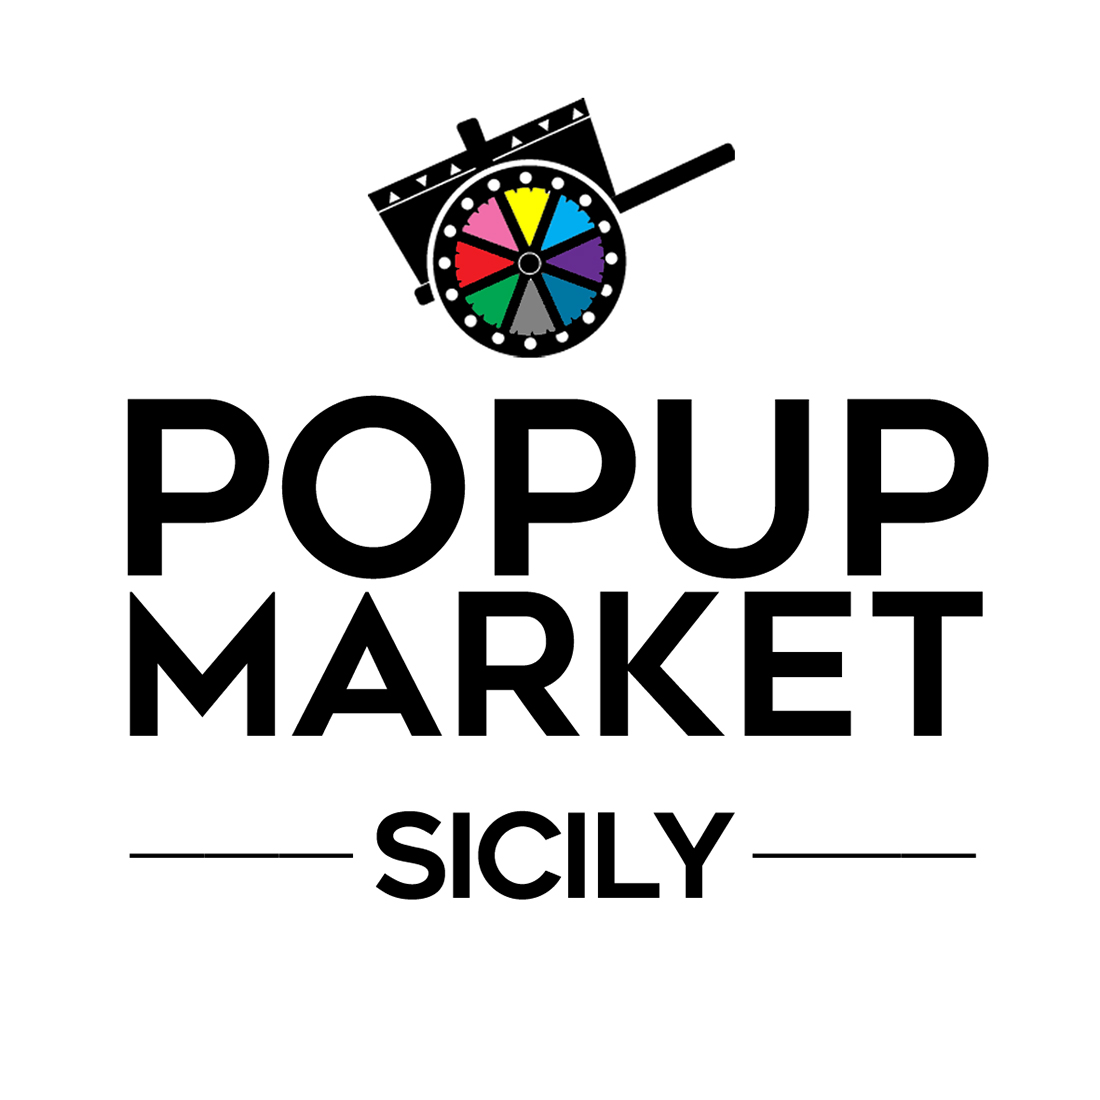 Working relationship with "Pop Up Market - Sicily"